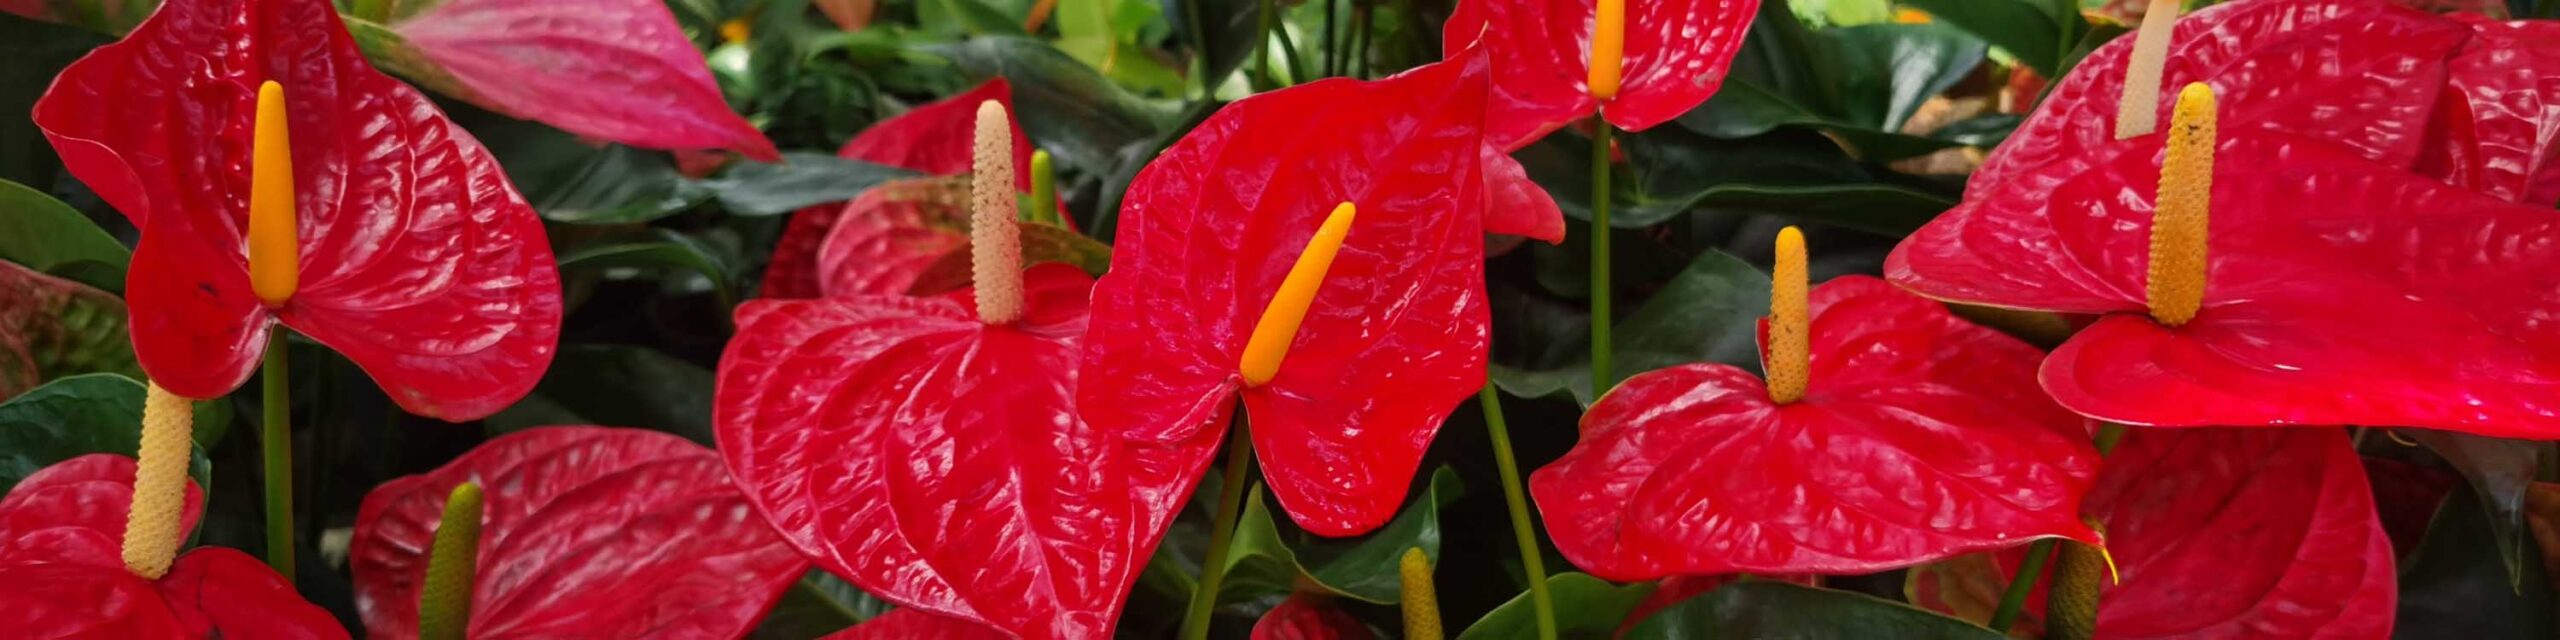 Close up of read anthurium leaves or flowers.